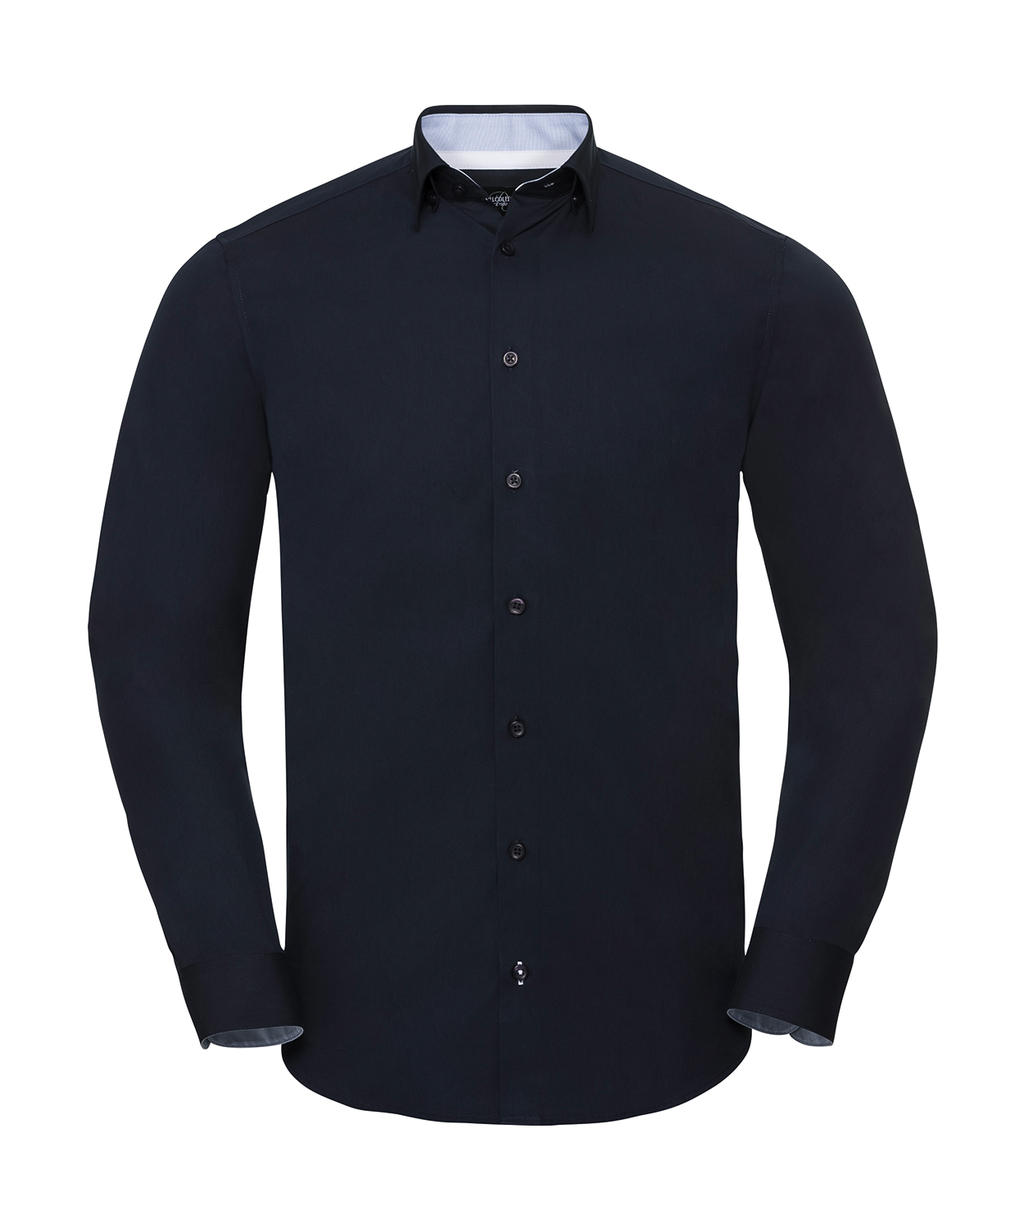  Mens LS Tailored Contrast Ultimate Stretch Shirt in Farbe Bright Navy/Oxford Blue/White